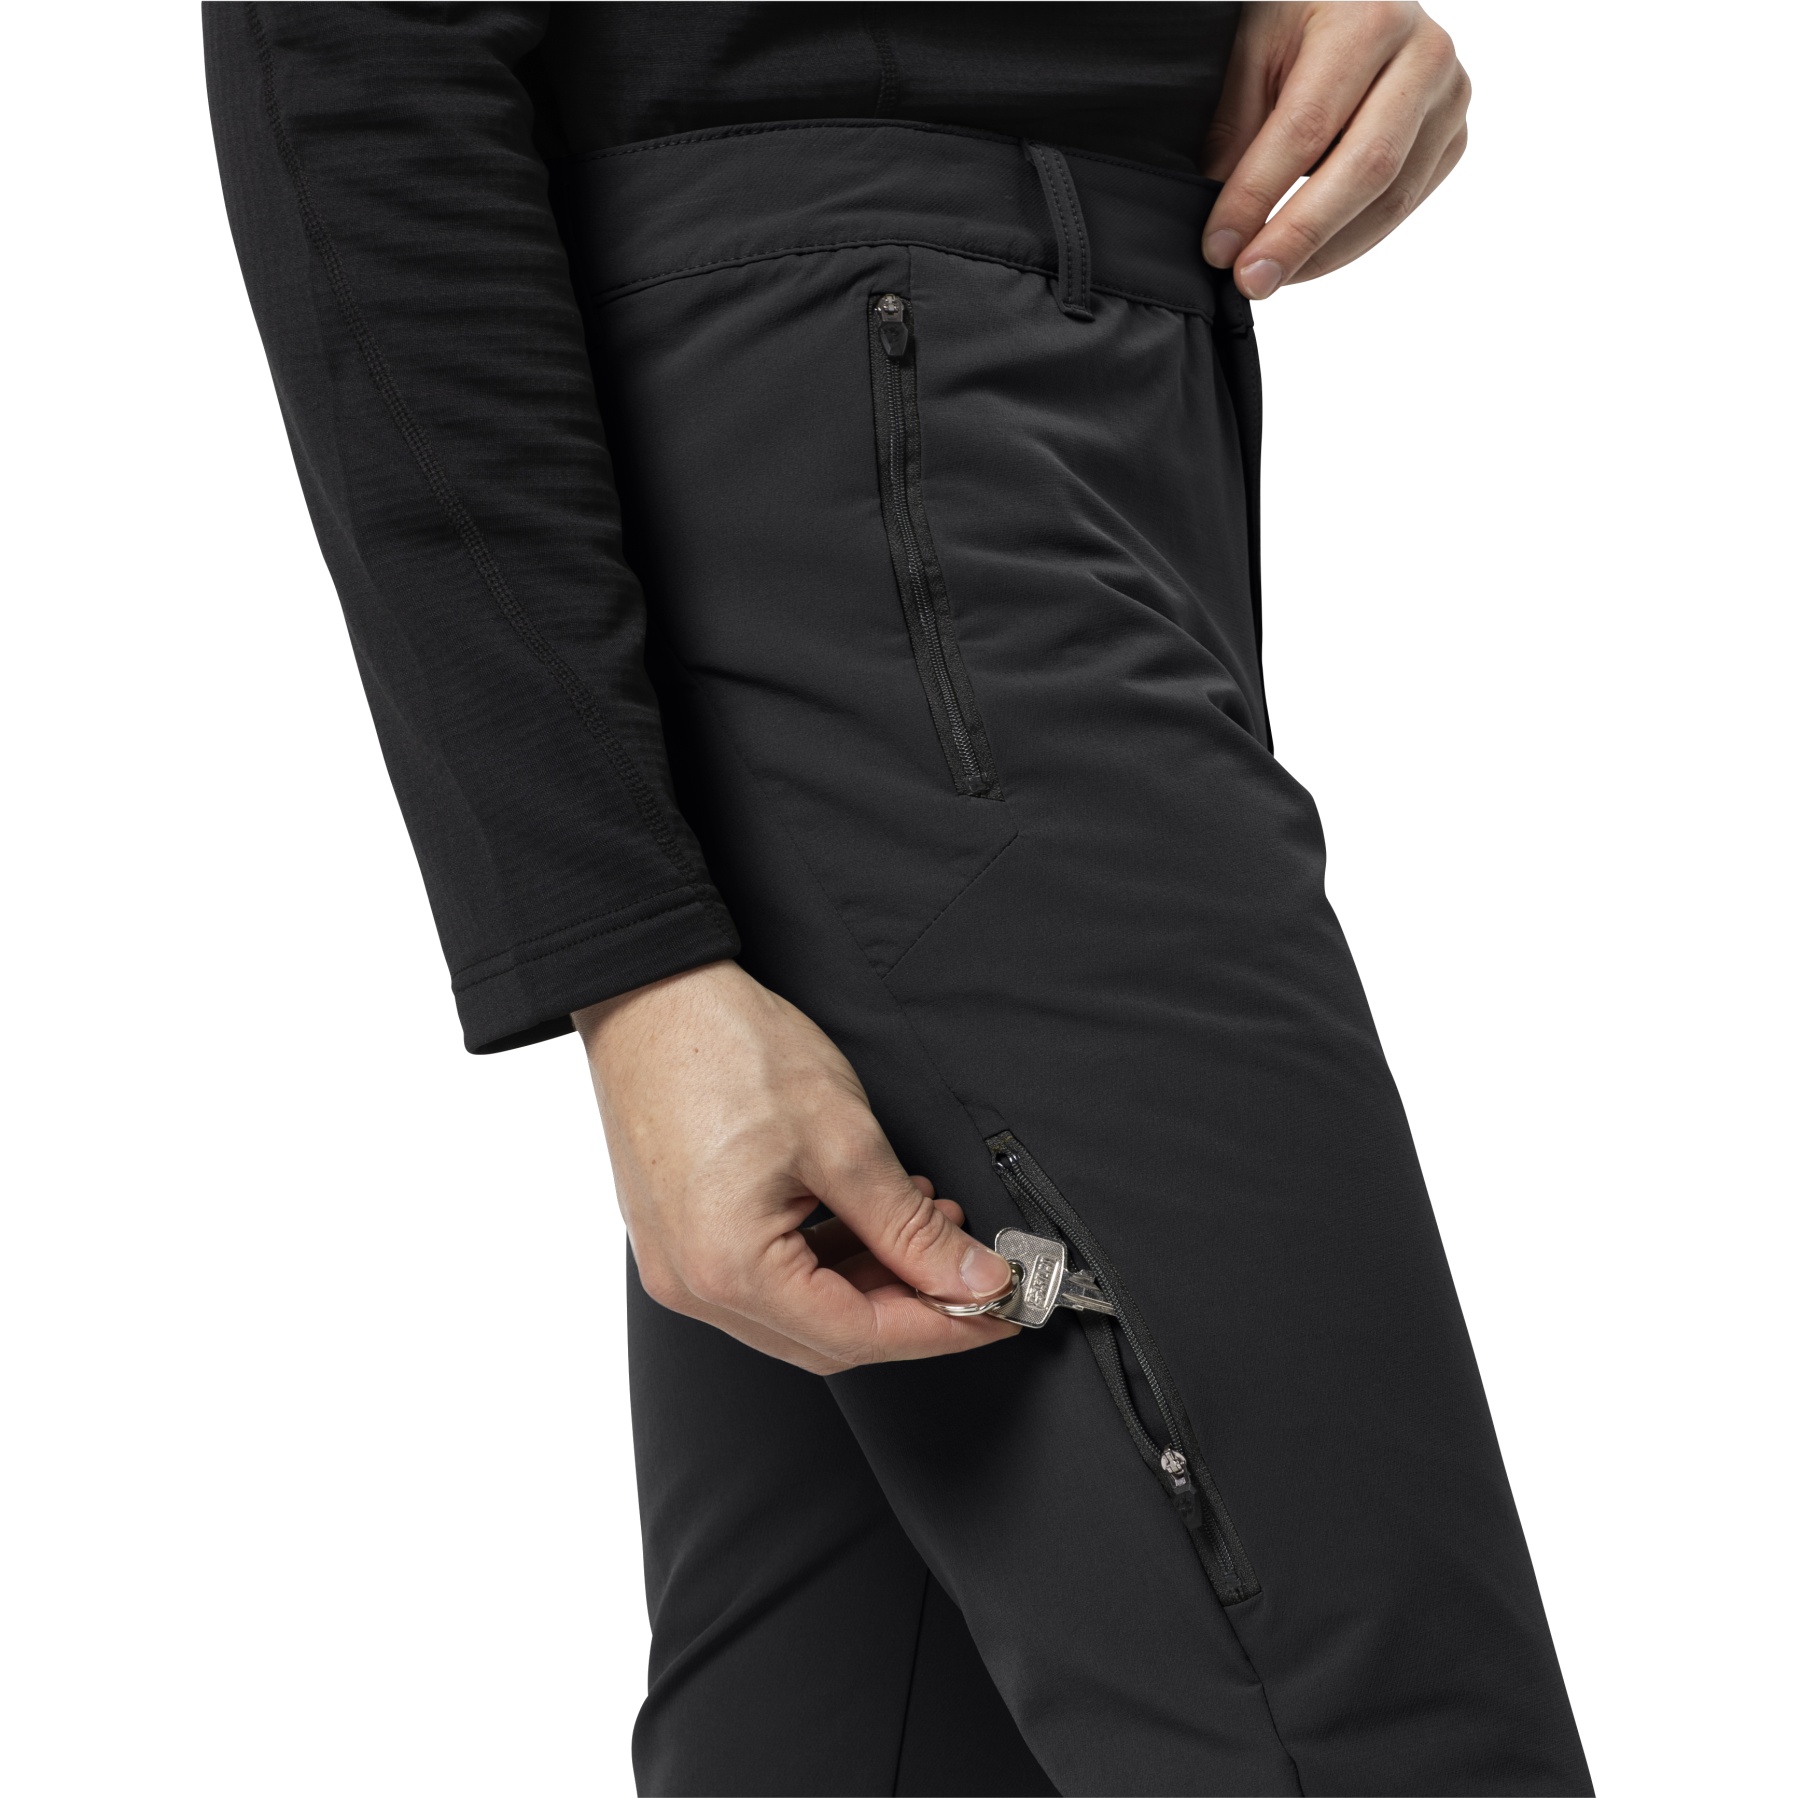 jack wolfskin Activate Thermic Men's Pants – RUNNERS SPORTS